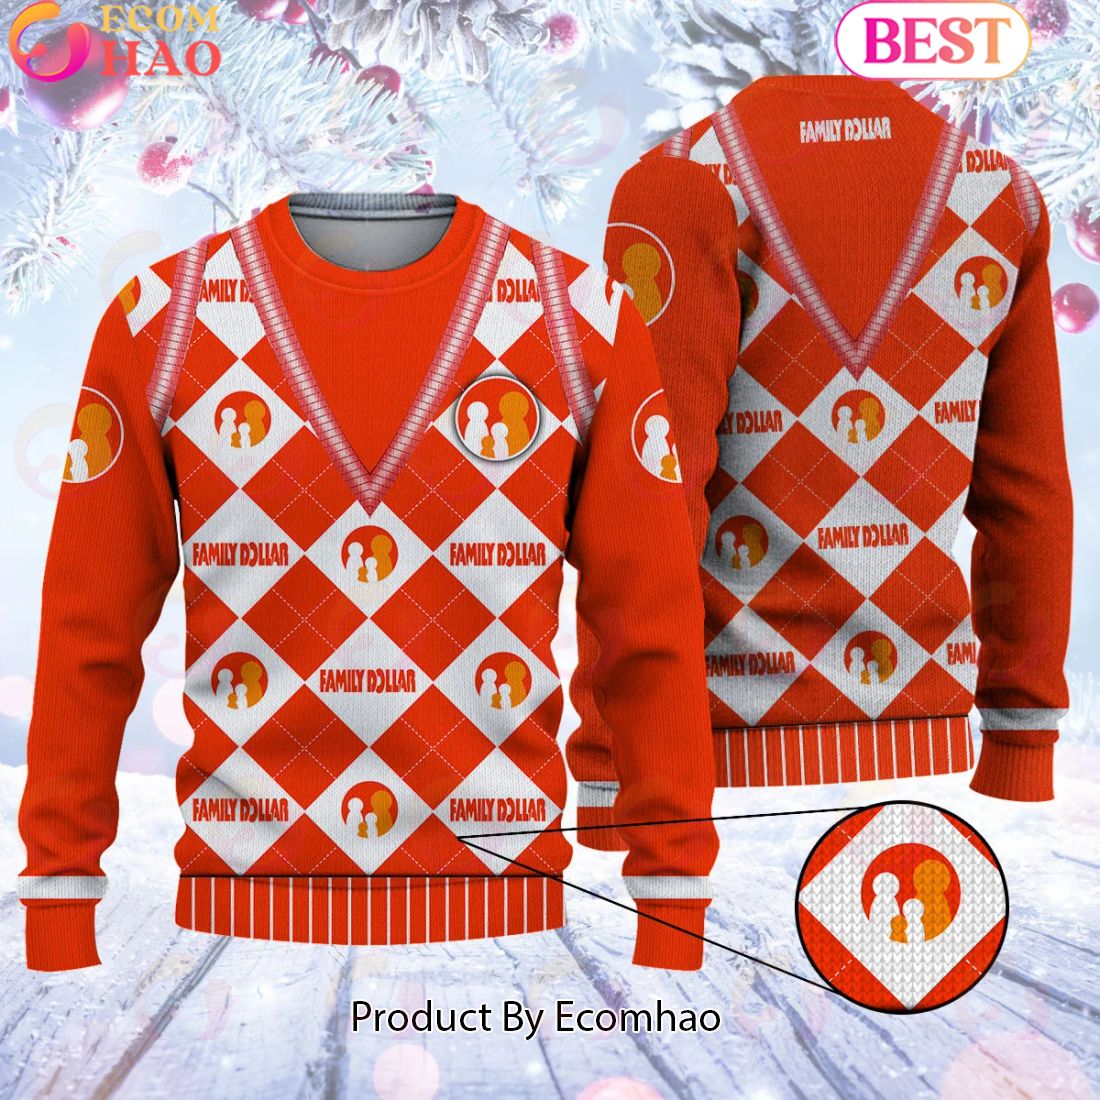 Toronto Maple Leafs Christmas Reindeer 3D Casual Ugly Sweater